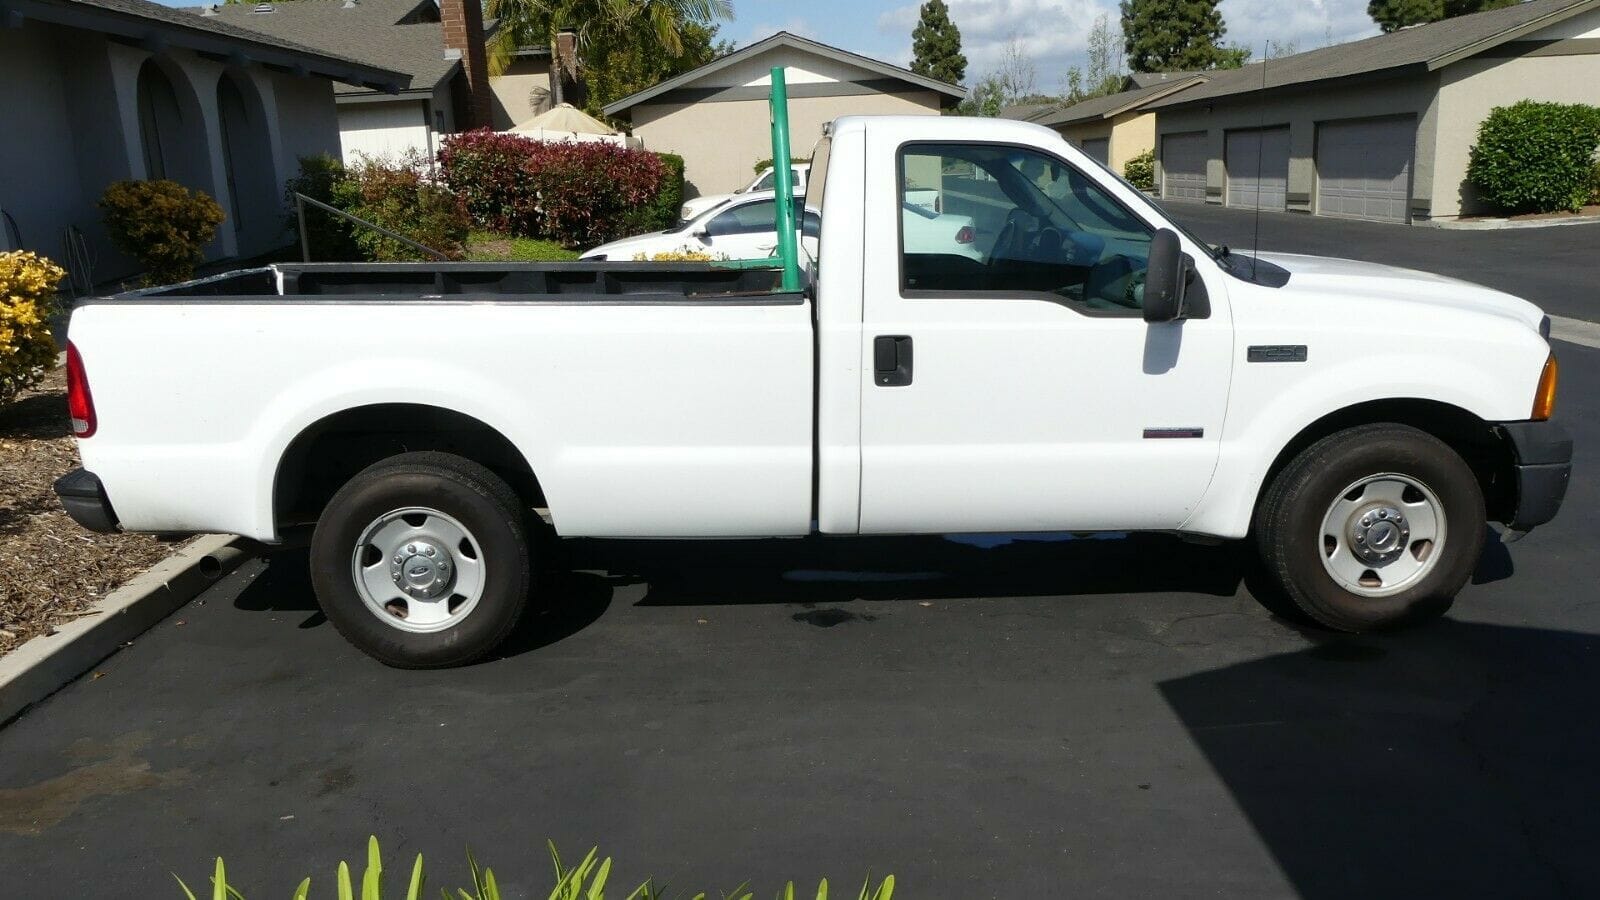 2007 Ford F-250 Super Duty - 2007 Ford F-250 6.0 PowerStroke Turbo Diesel - Used - VIN 1FTSF20P27EA60228 - 162,000 Miles - 8 cyl - 2WD - Automatic - Truck - White - Oceanside, CA 92058, United States